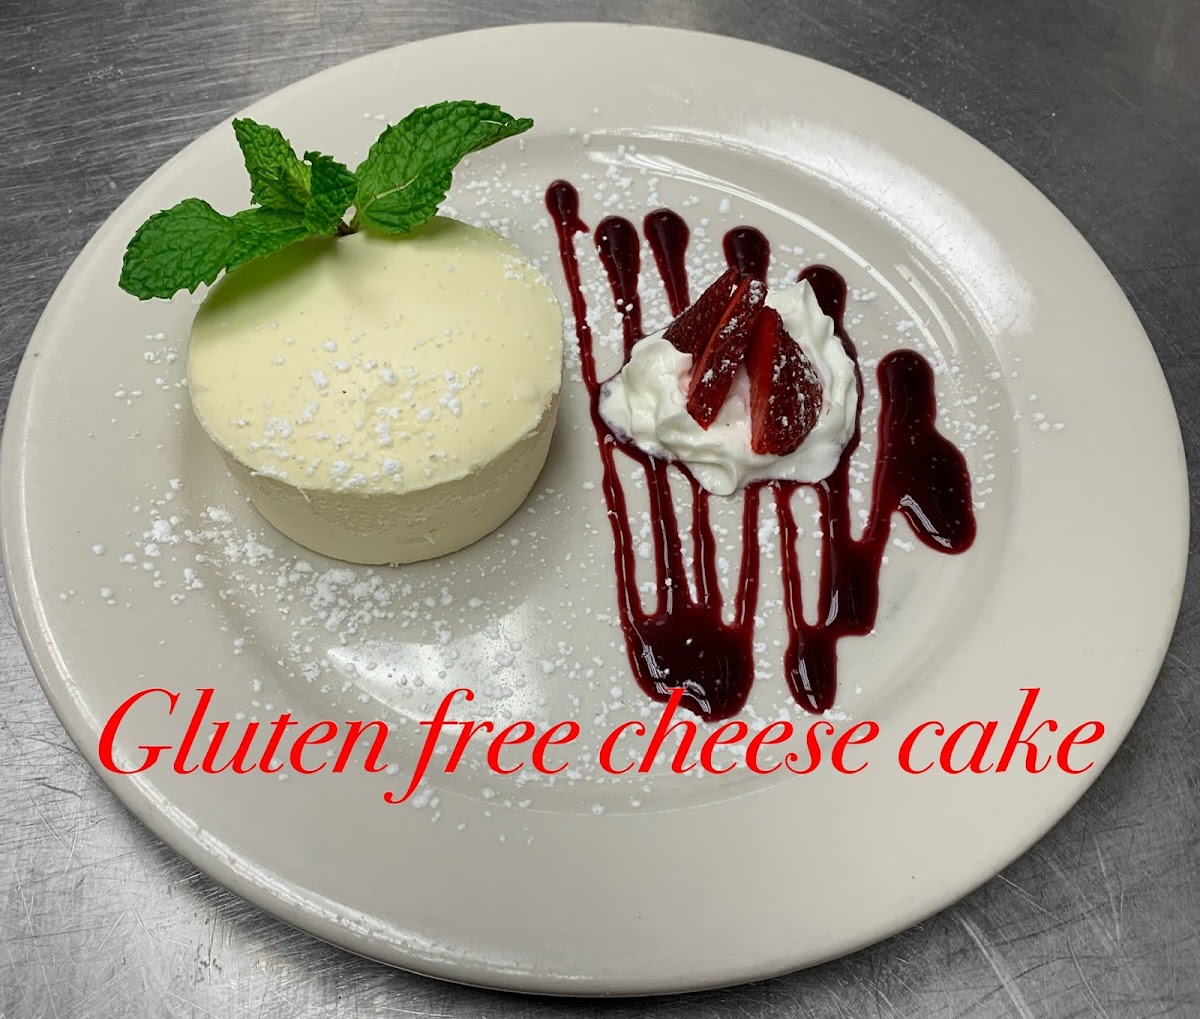 A delicious beautifully presented Gluten free Cheesecake.